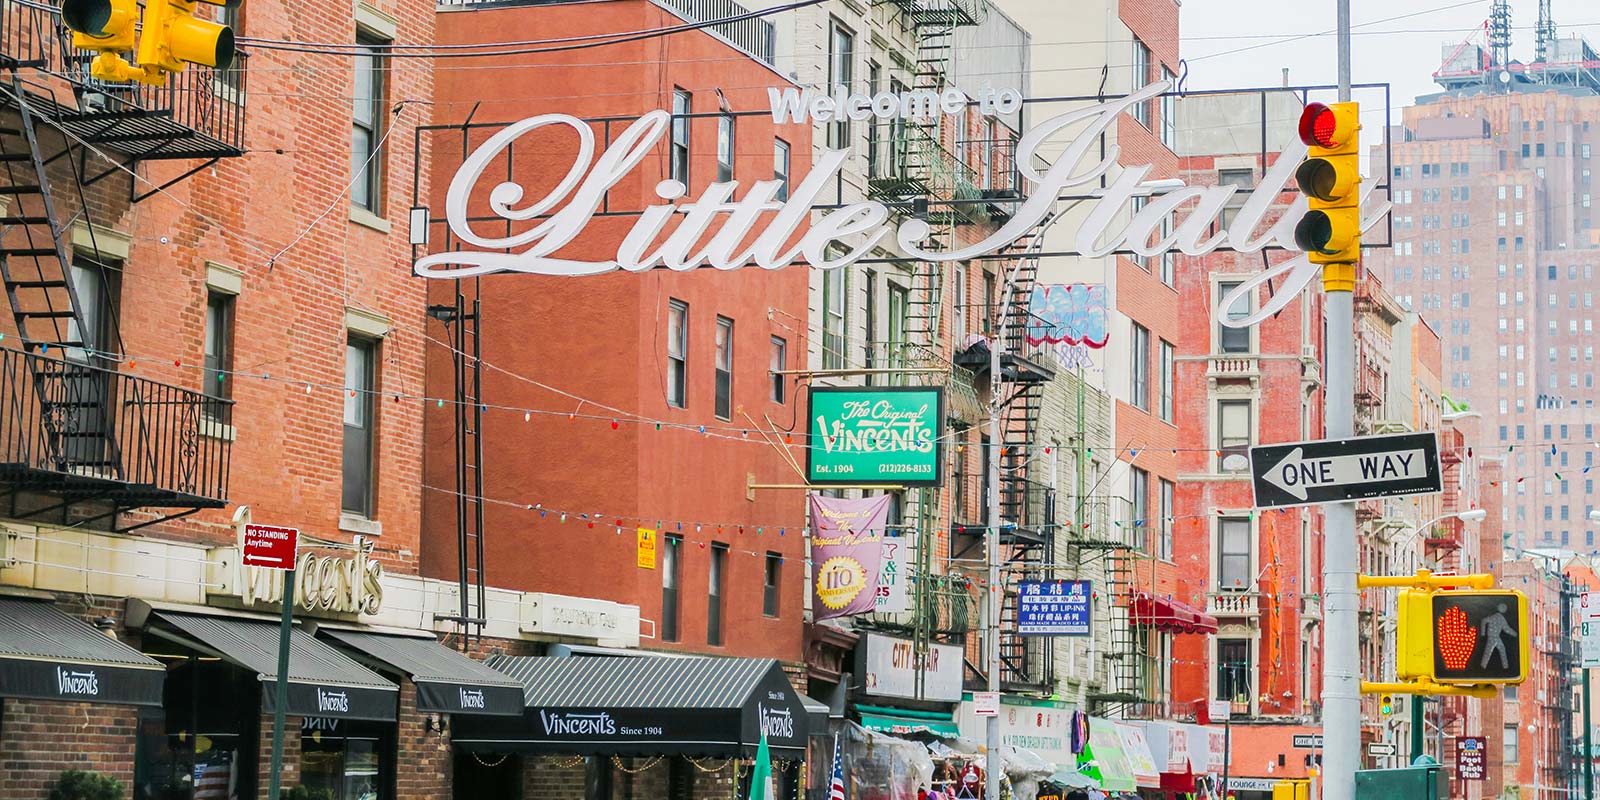 Head to Little Italy